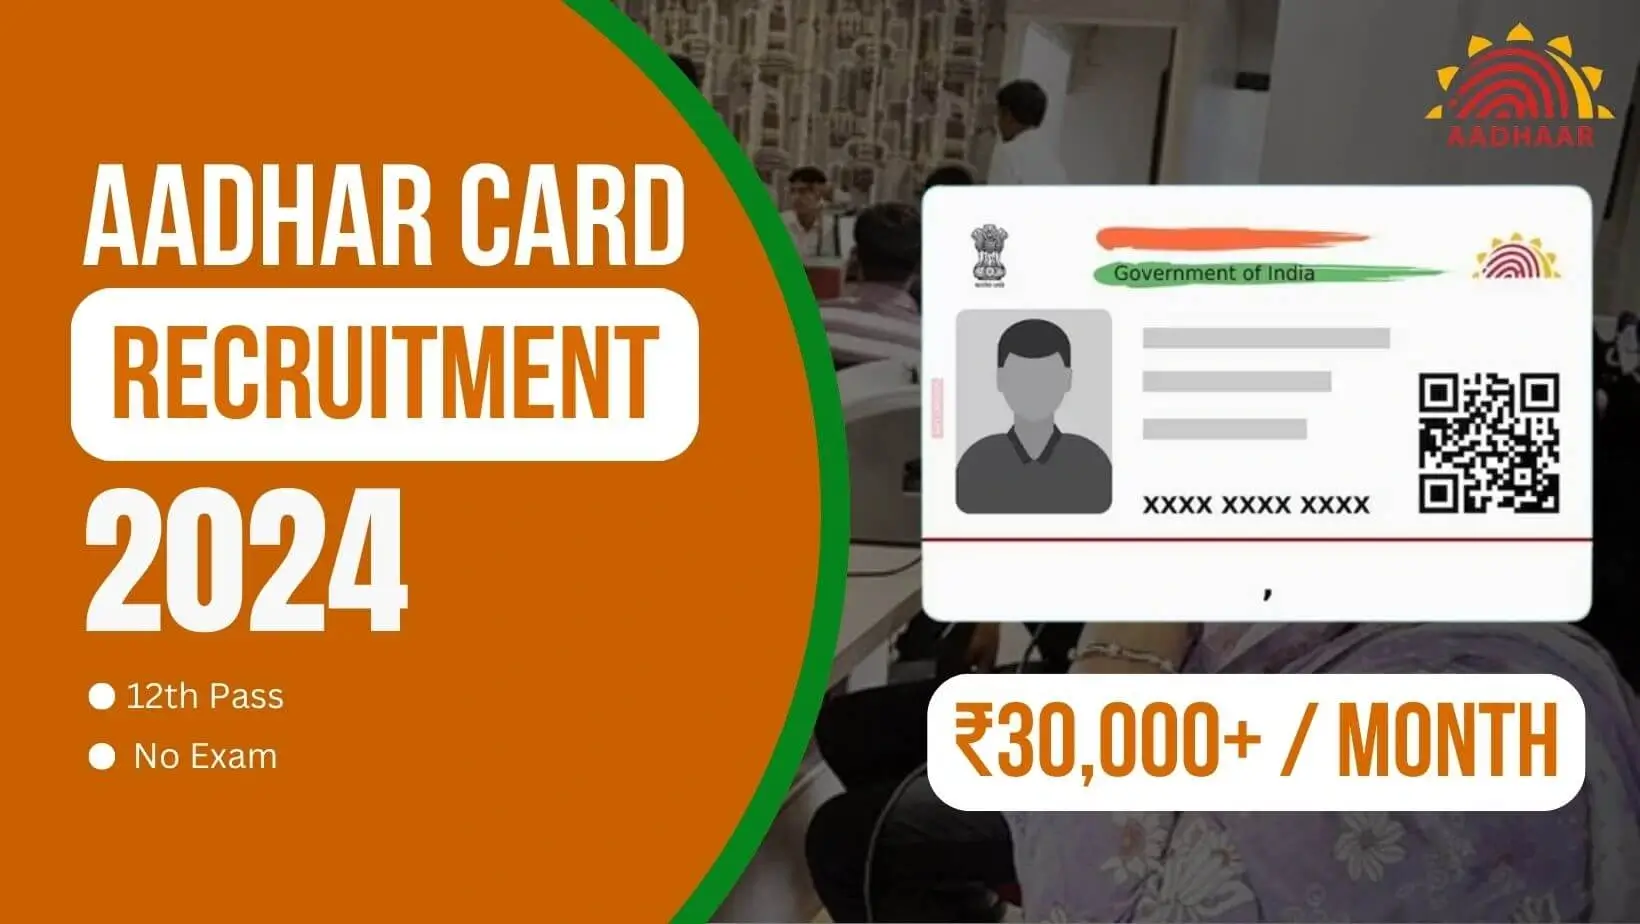 Aadhar Card Recruitment Notification has released by UIDAI. 12th Pass candidates can apply for this and no examination is required. ₹ 30,000+ Salary.